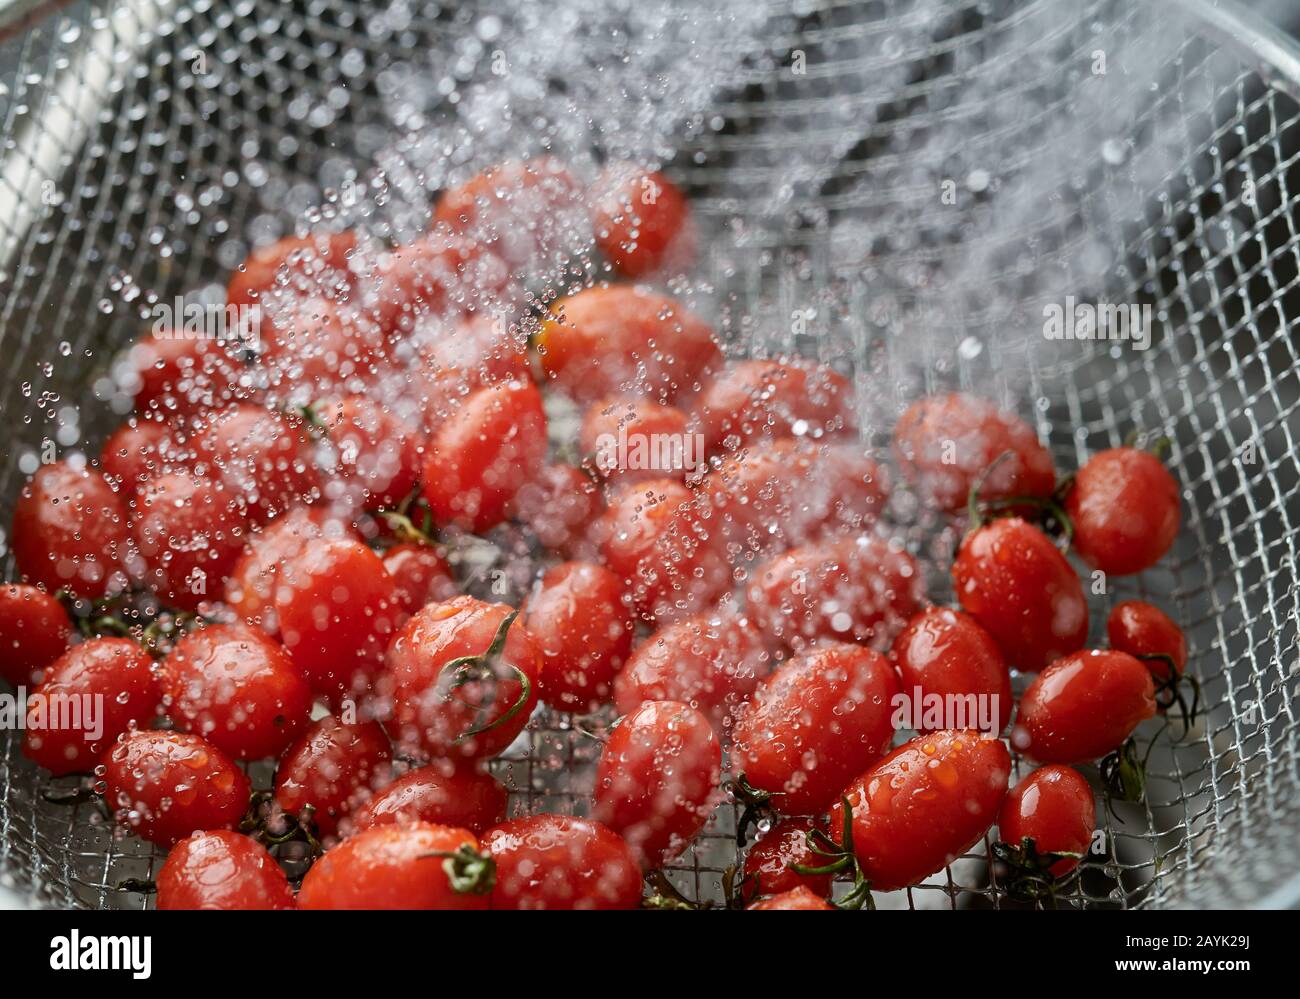 Cleaning the vivid red ripe tomatoes in the metal wire basket Stock Photo